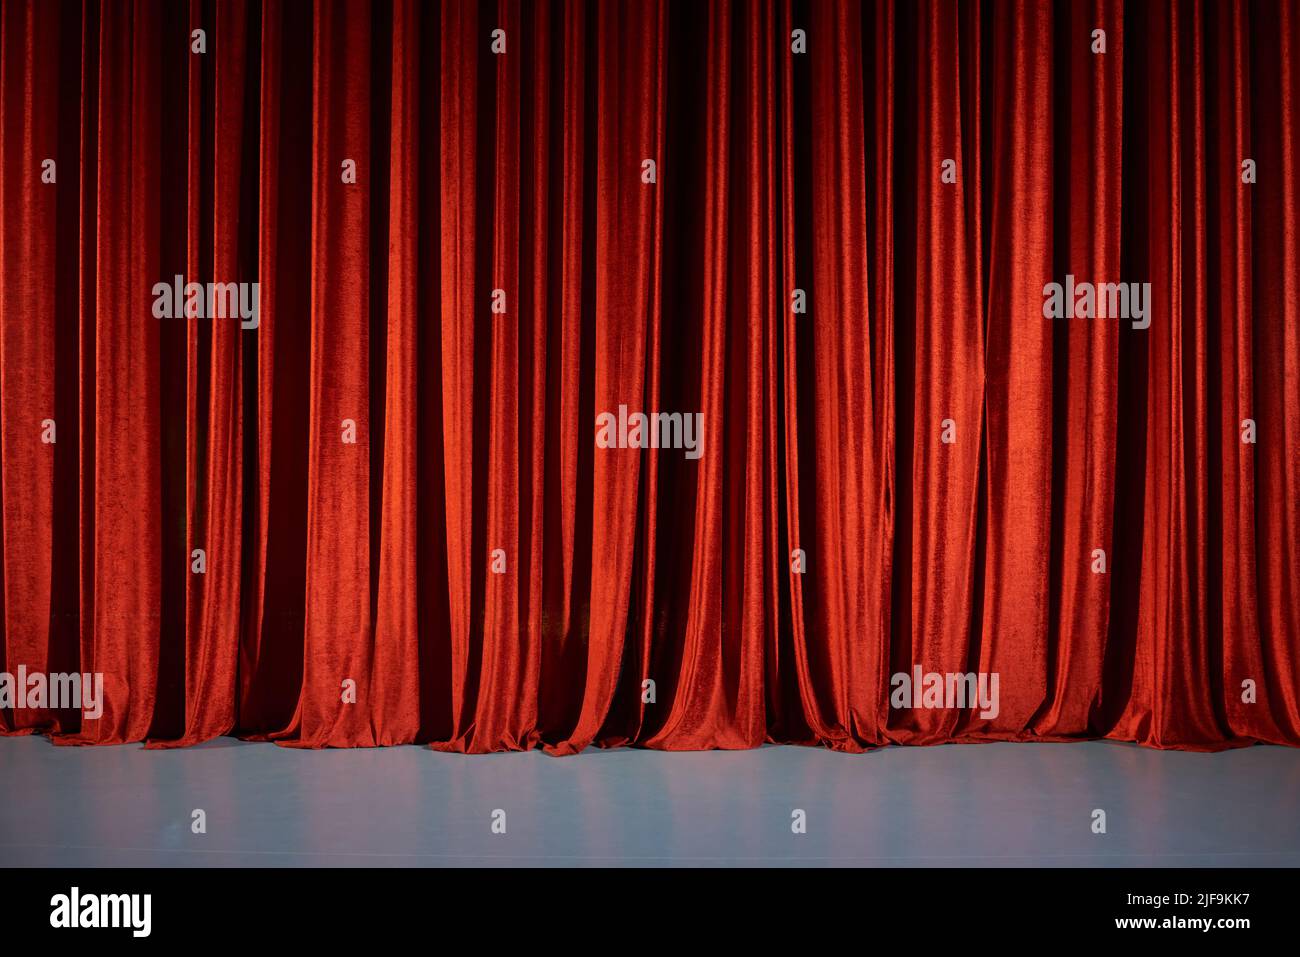 Closed red curtains on stage in theater. Stock Photo